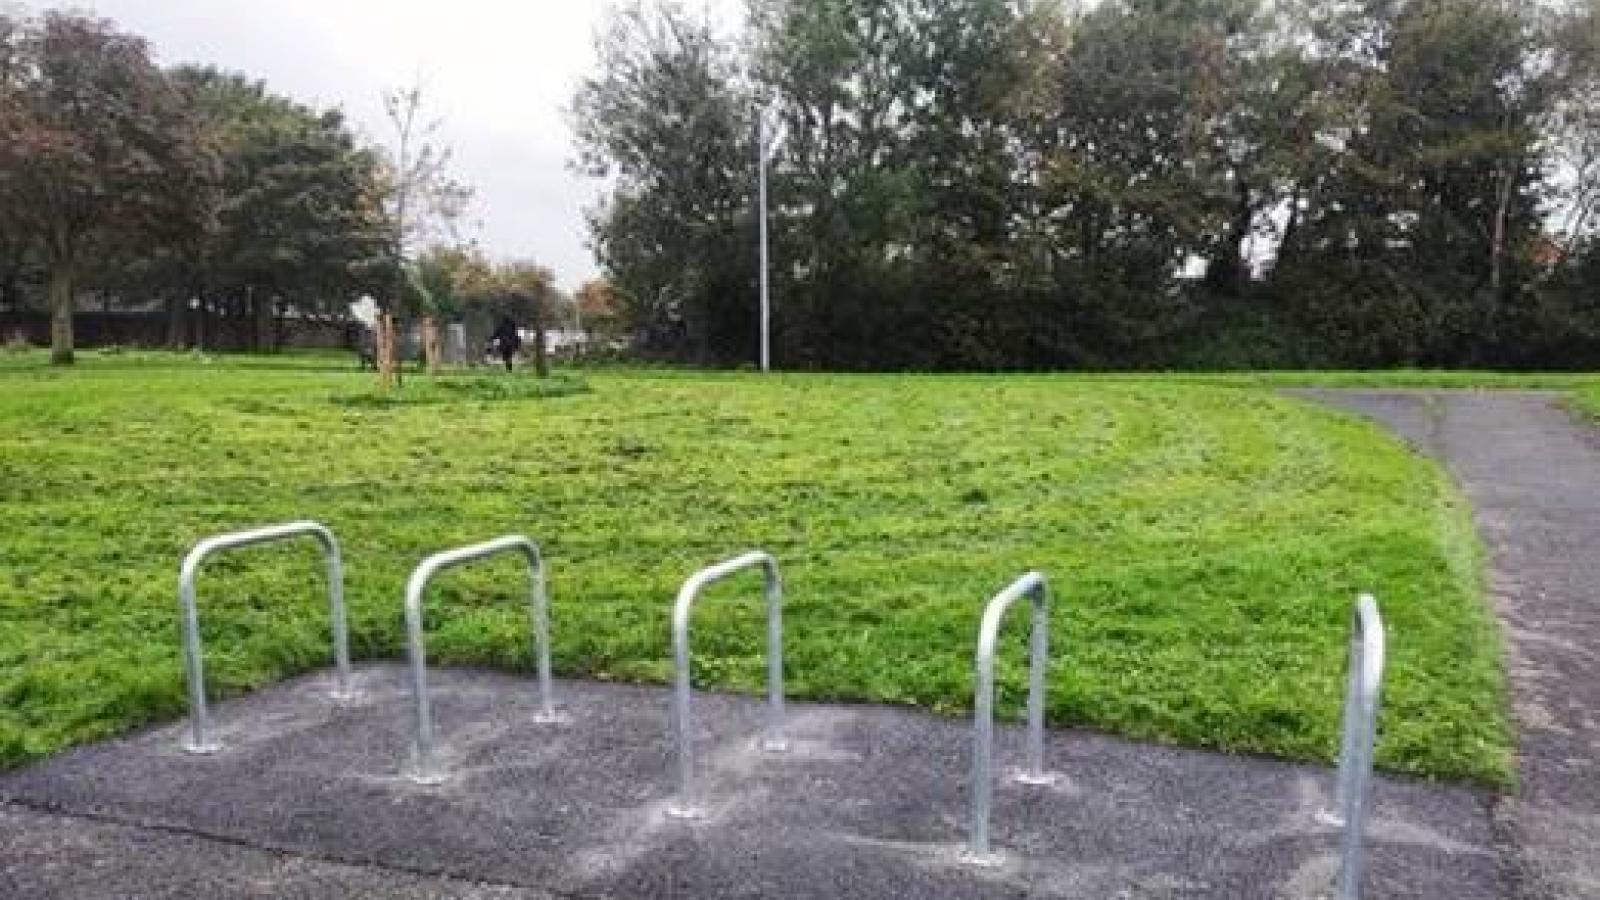 empty bicycle stands next to grass at seagrange basketball court baldoyle